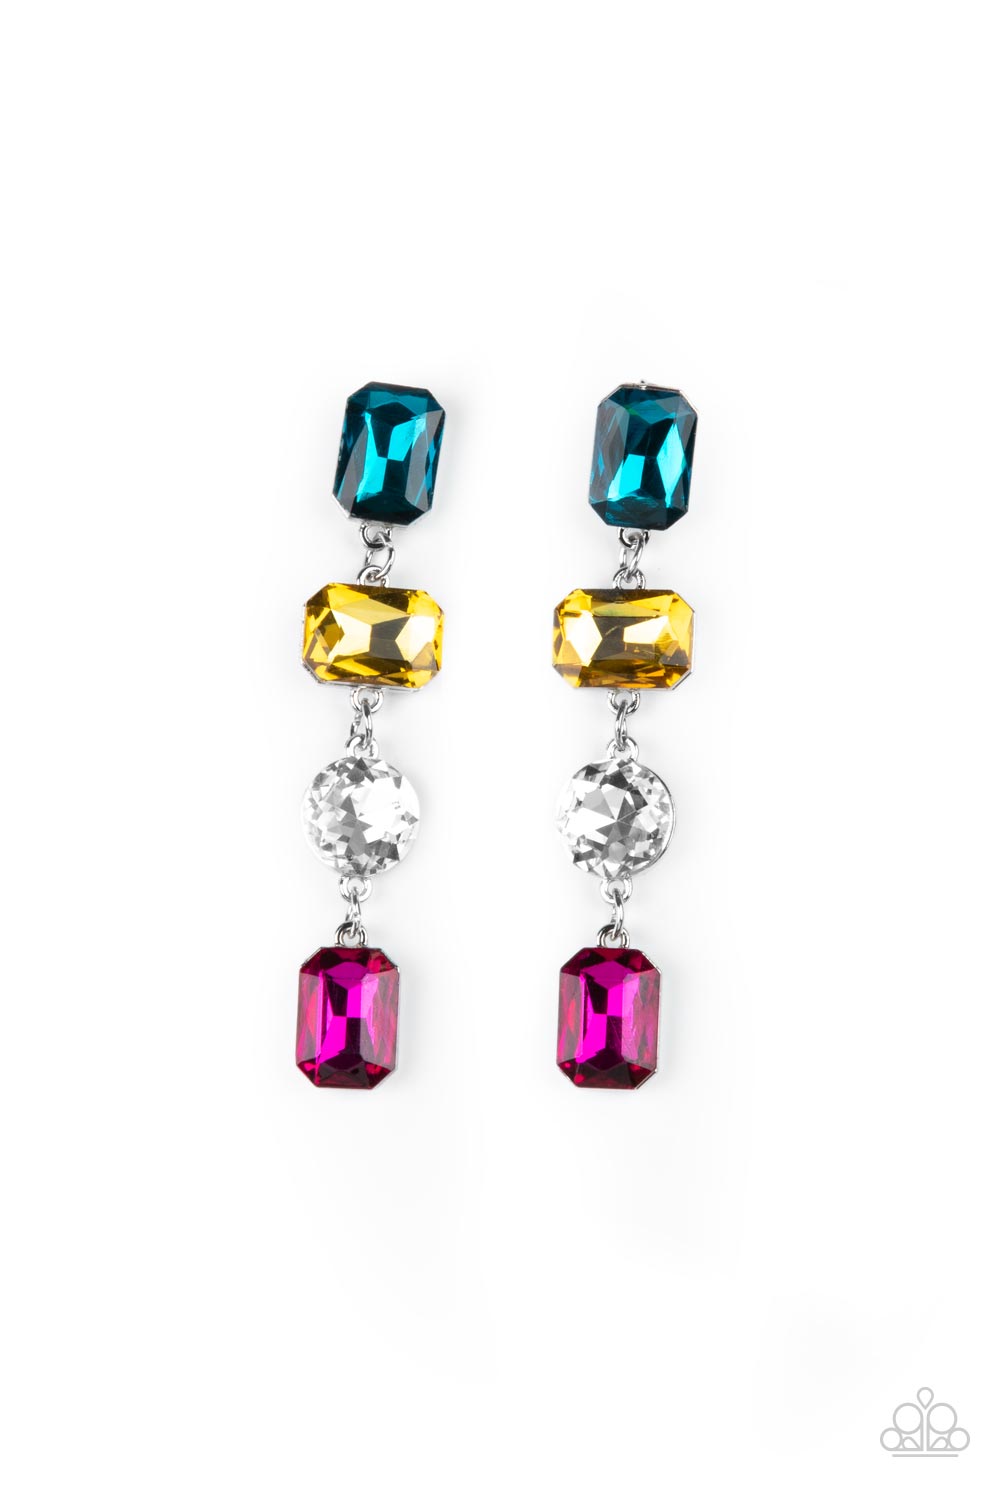 Cosmic Heiress Multi Blue Yellow and Pink Rhinestone Earrings - Paparazzi Accessories- lightbox - CarasShop.com - $5 Jewelry by Cara Jewels